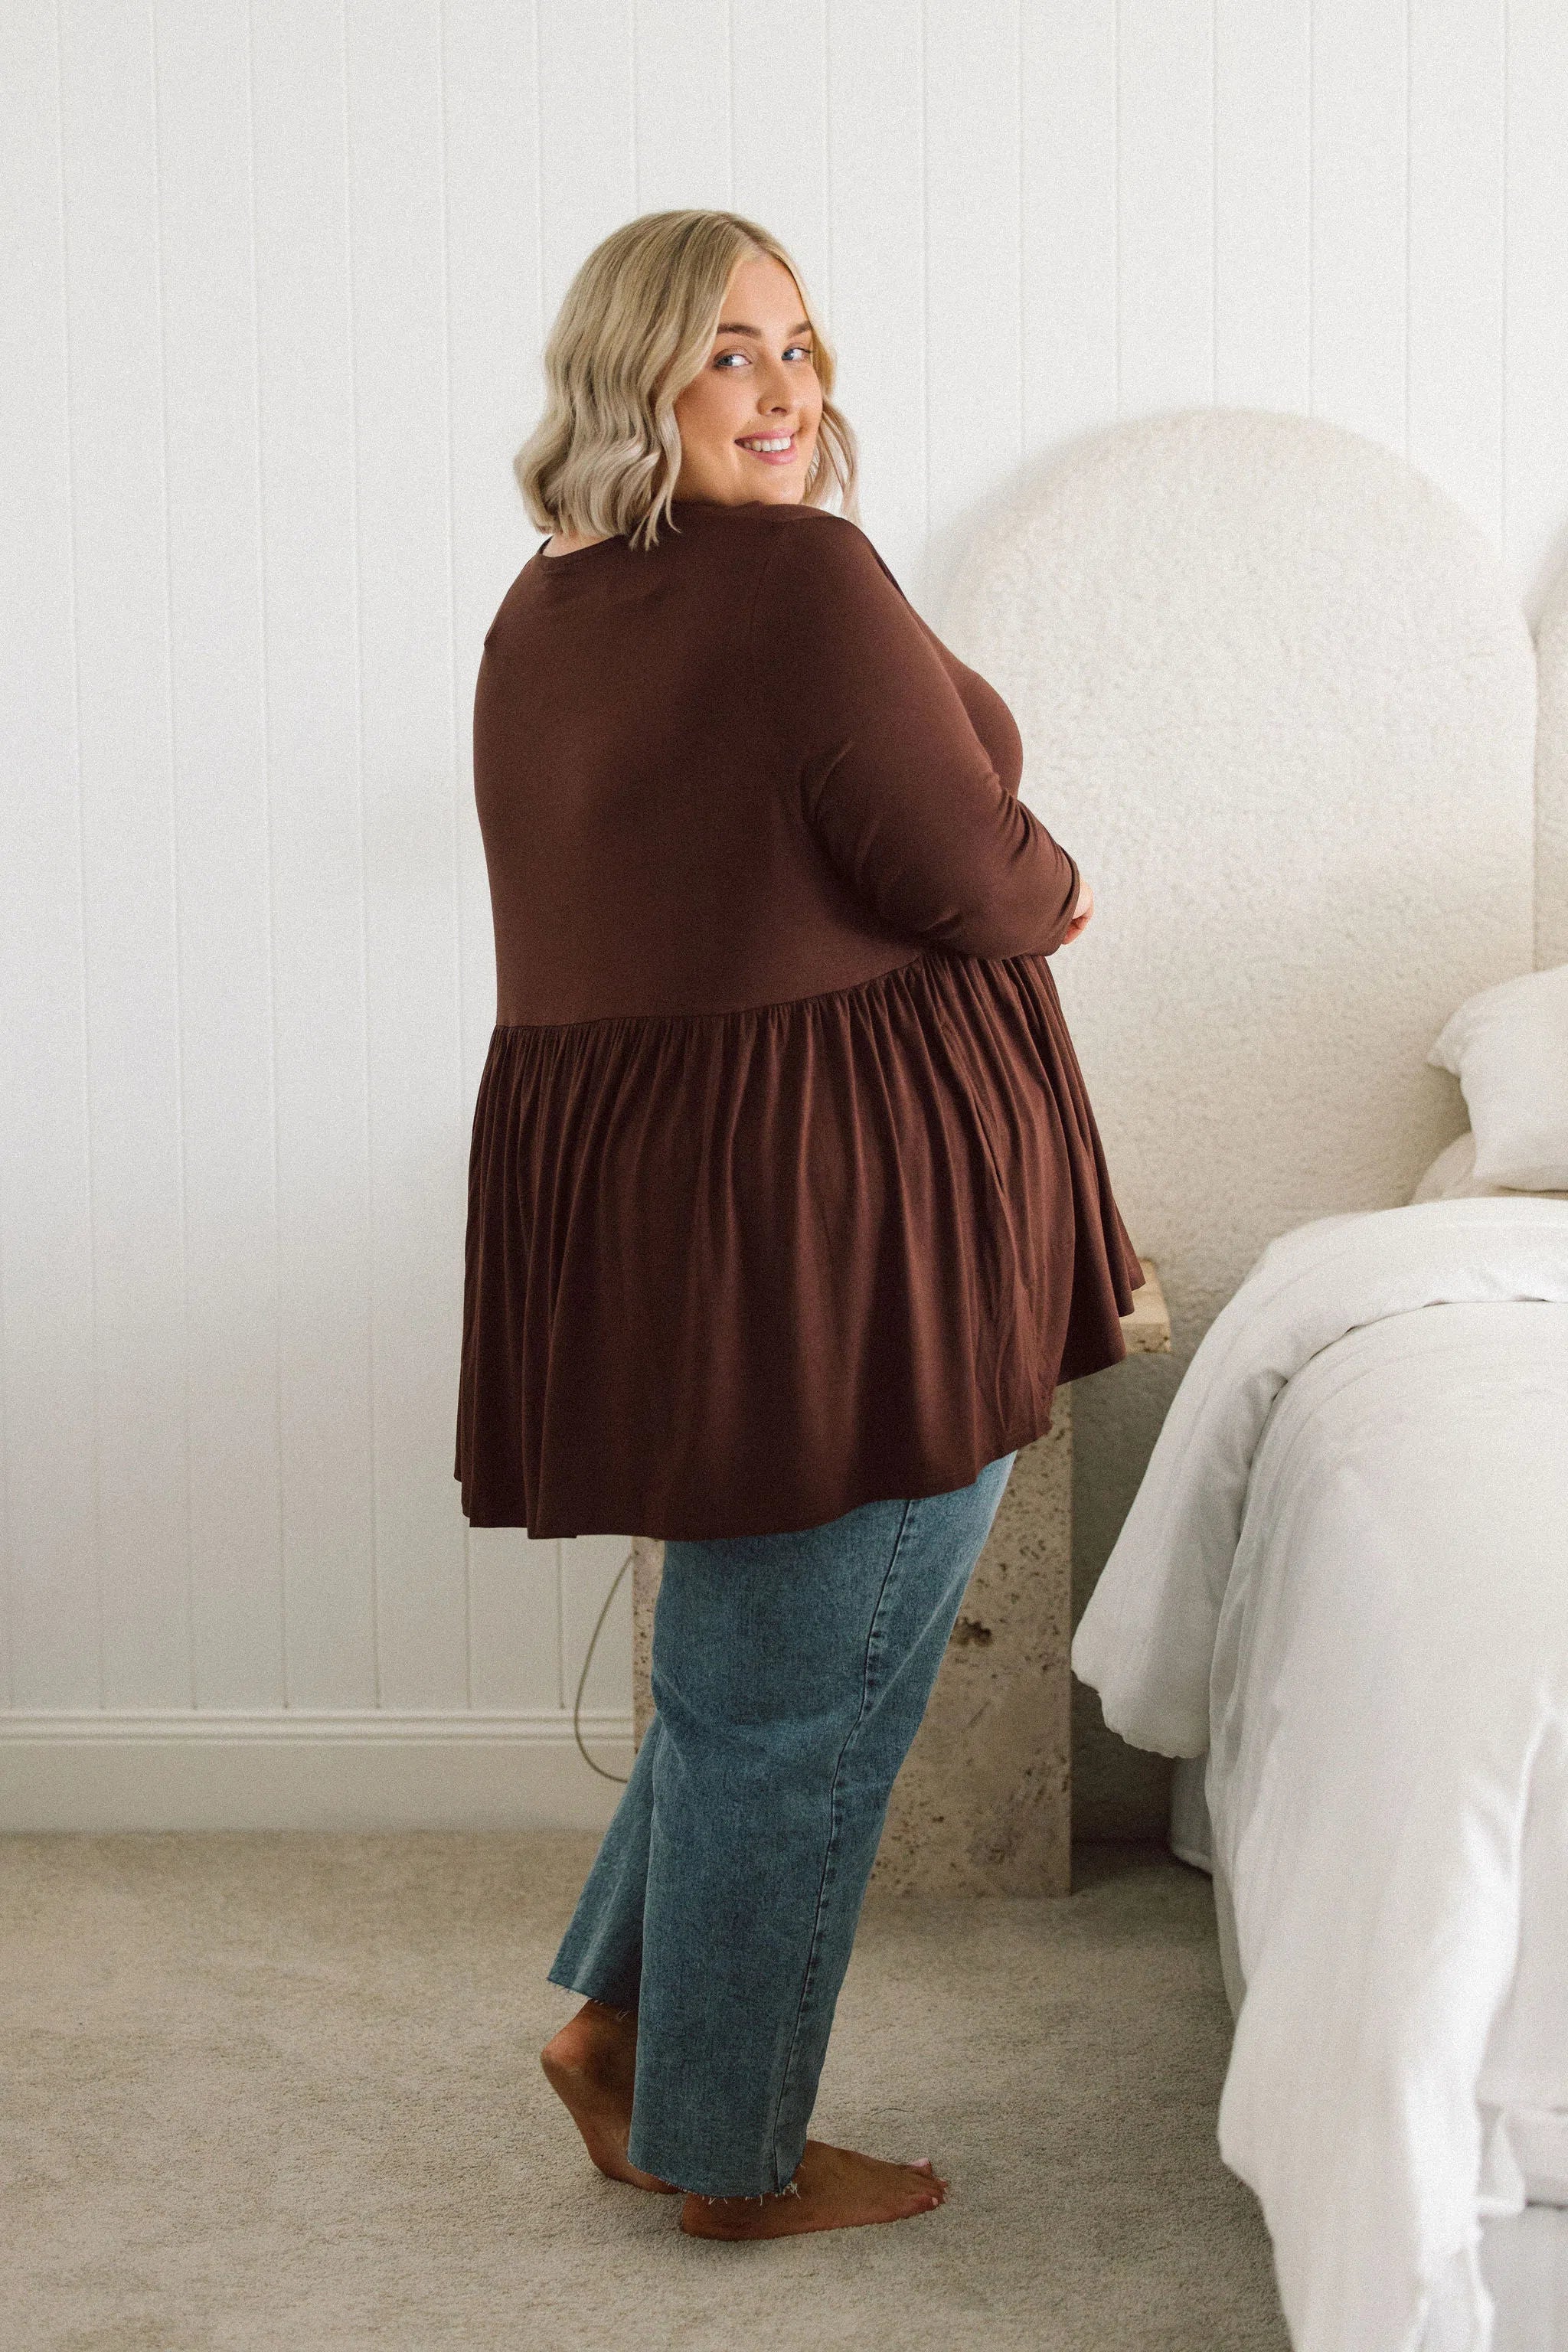 Plus Size clothing,  women modeling a winter Womens Plus Size Tops, Lucy Long Sleeve Top in Purple chocolate brown